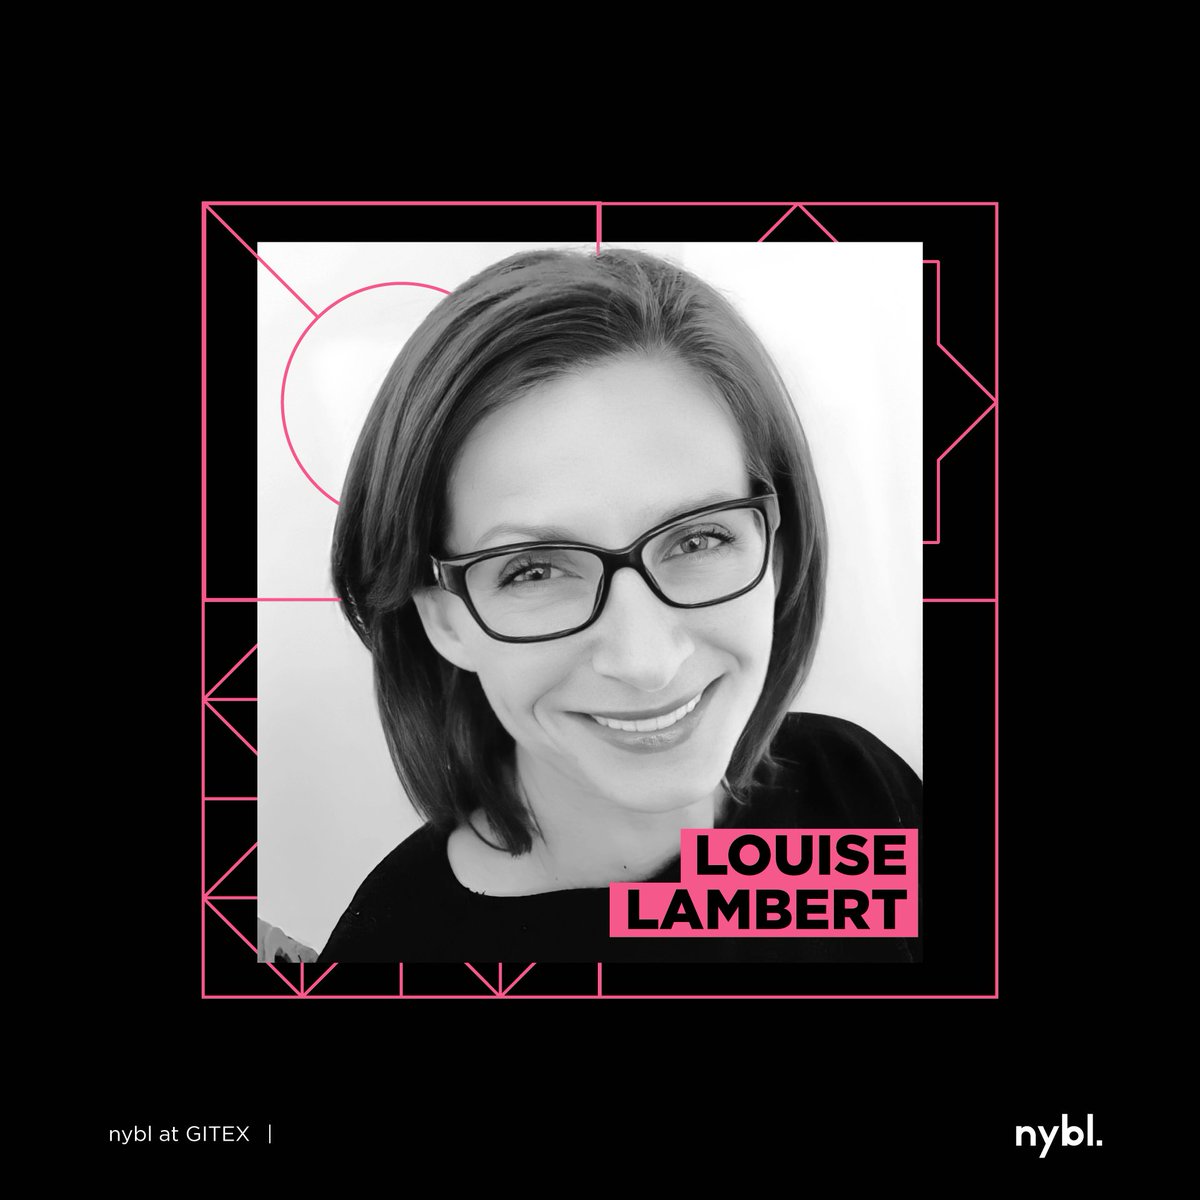 Episode 12 of nybl Voices with Dr Louise Lambert- 'Empower your leadership journey by reframing the dialogue around stress' 

Listen to nybl Voices on ALL Podcast platforms, click the link below ⬇️
eu1.hubs.ly/H08VmRh0

#nybl_Voices #nybl_is_everywhere
#AI #WorkCulture